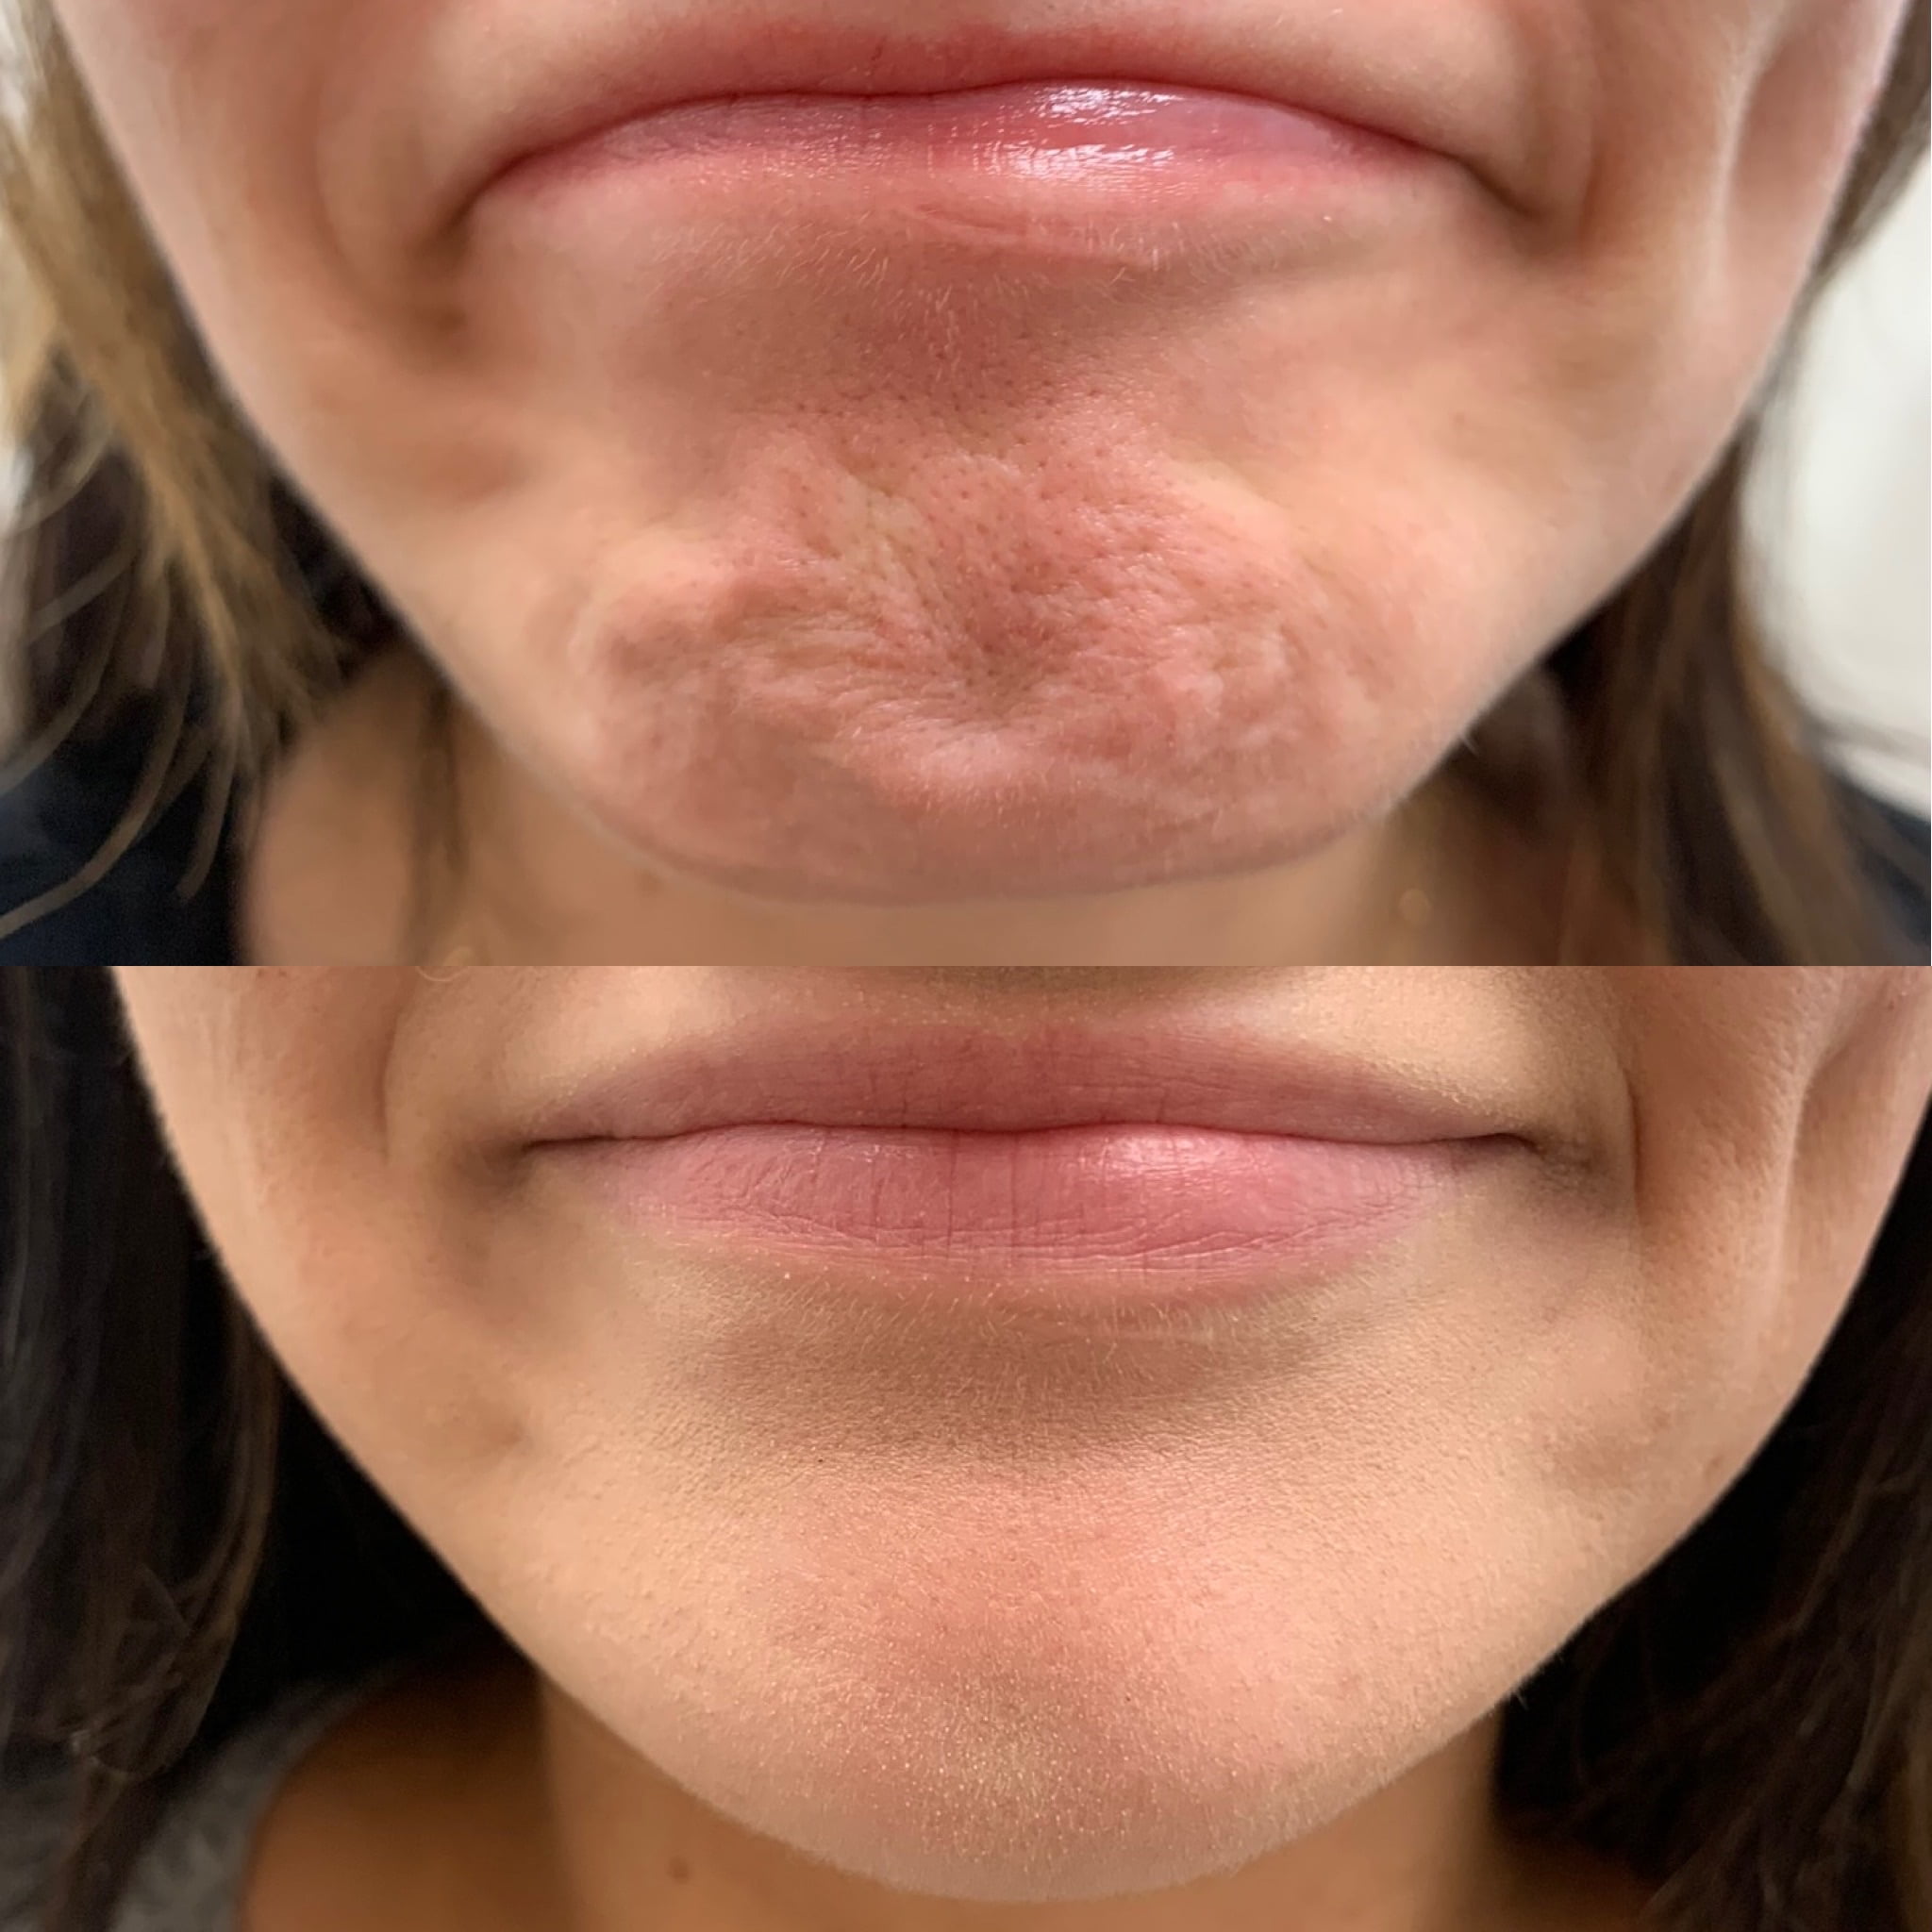 Before and After Botox Dao Chin treatment | Beauty Boost Med Spa in Newport Beach, CA